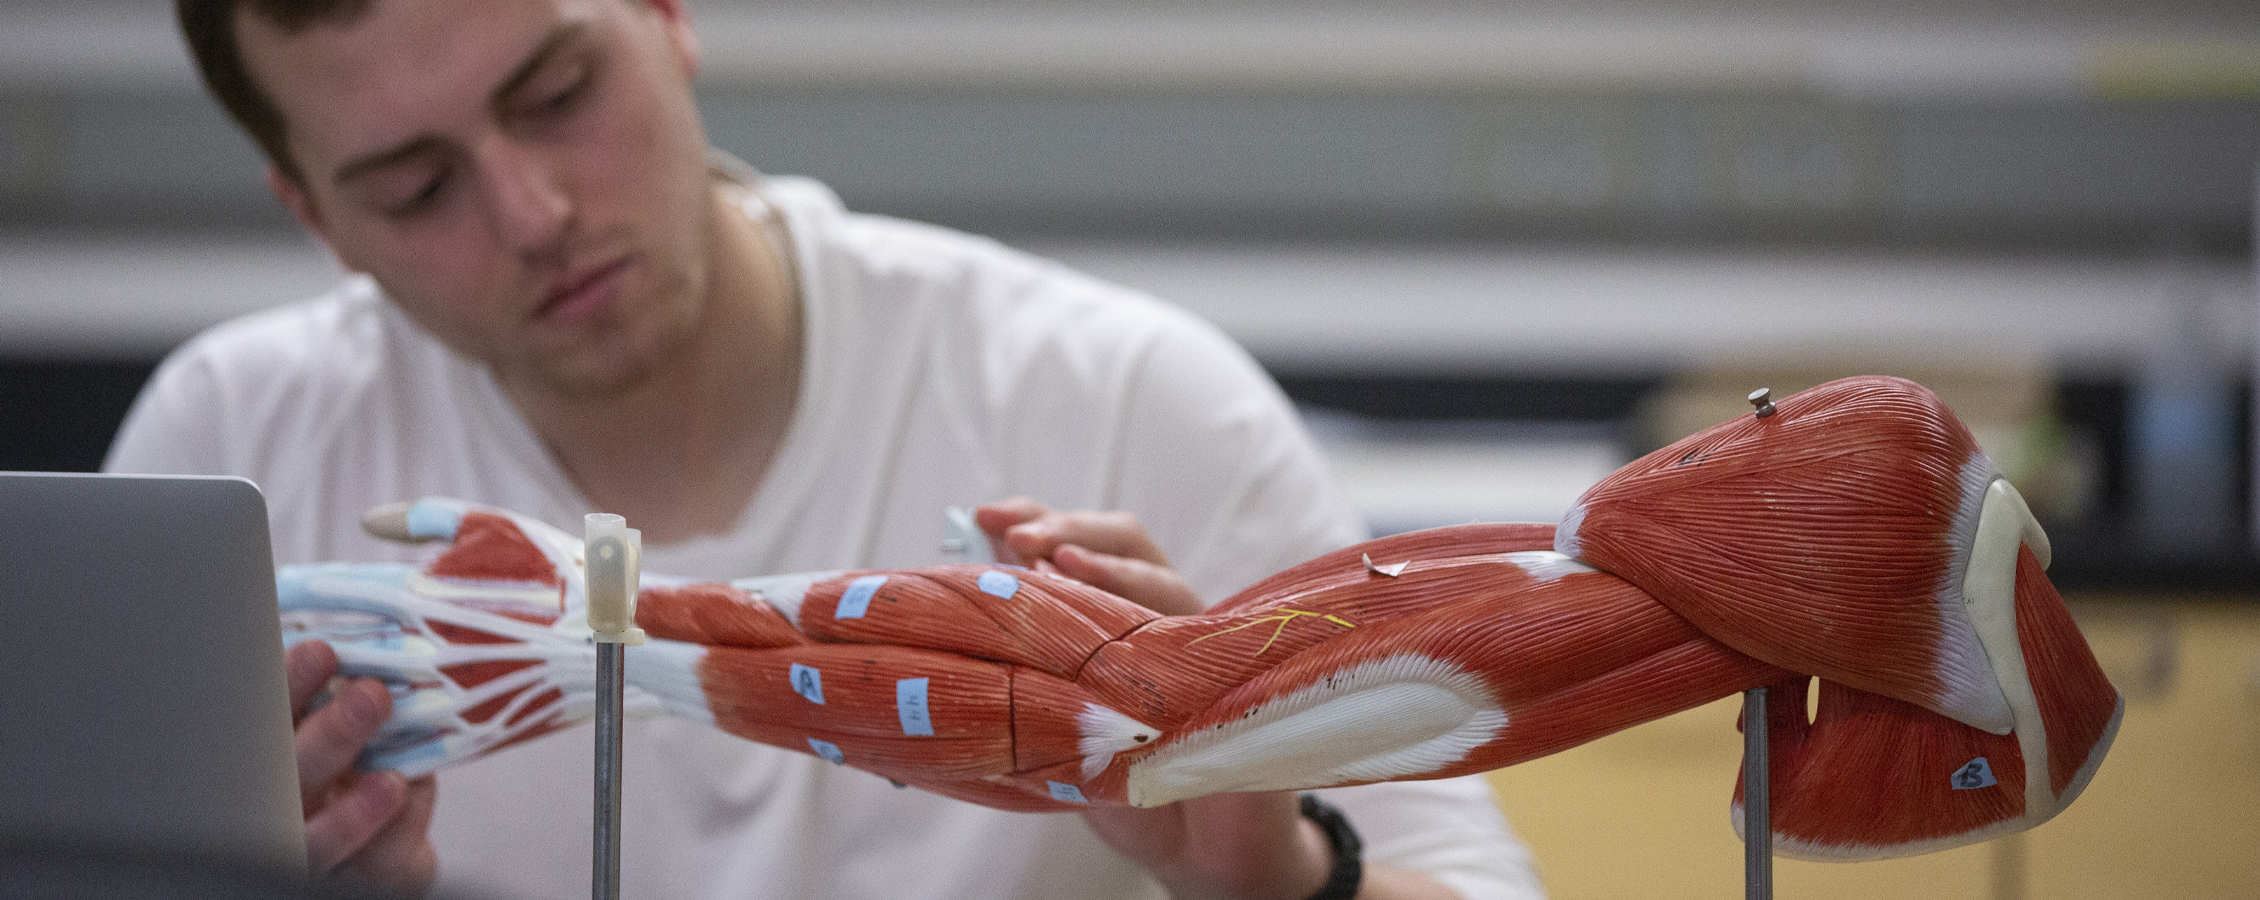 A student looks at a human anatomy 3-D model of a an arm.